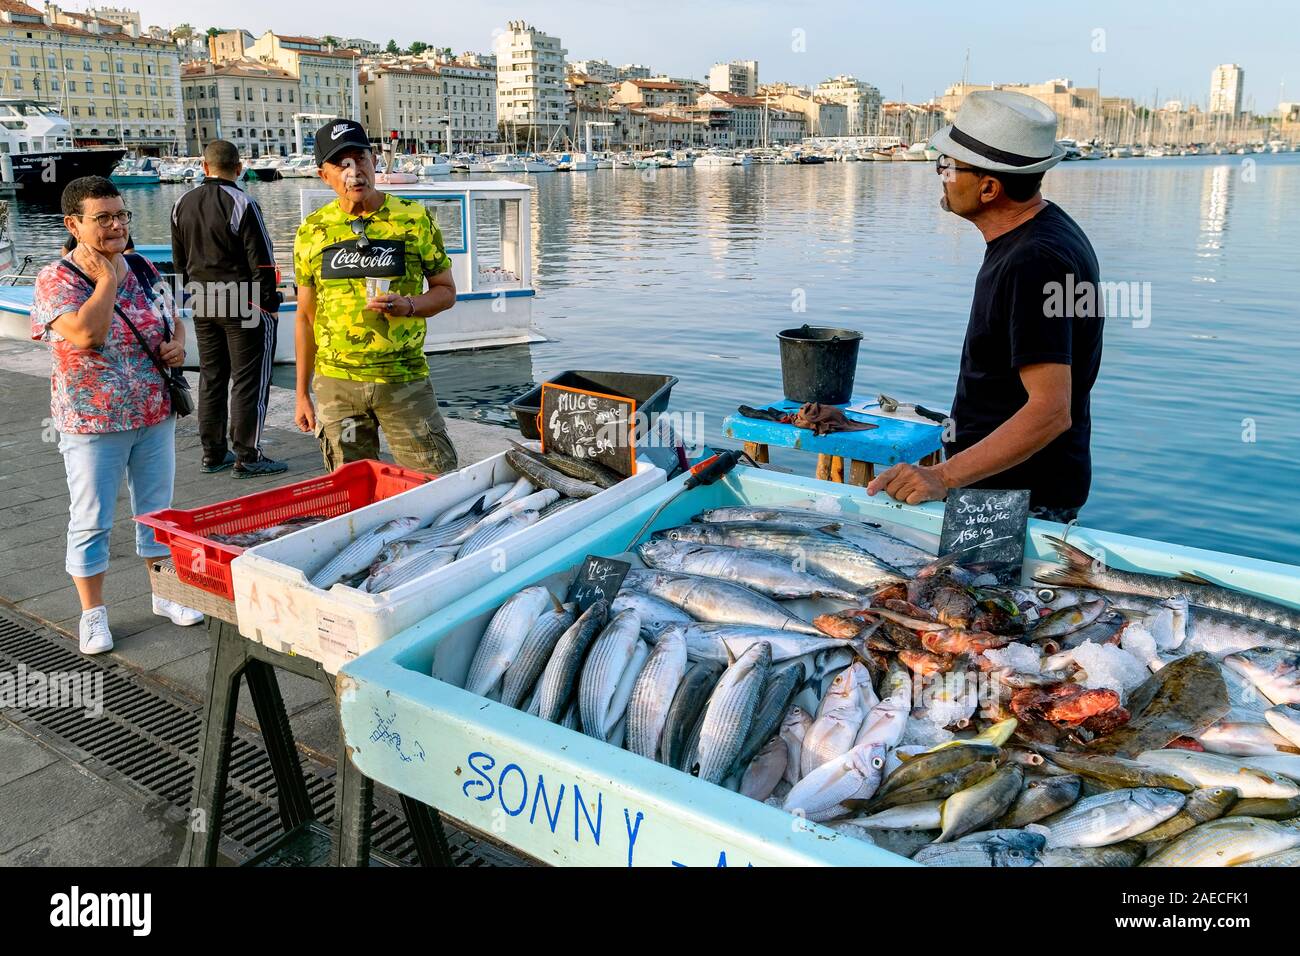 The fish market in the Old Port of Marseille / Vieux Port de Marseille, Provence, France, Europe Stock Photo